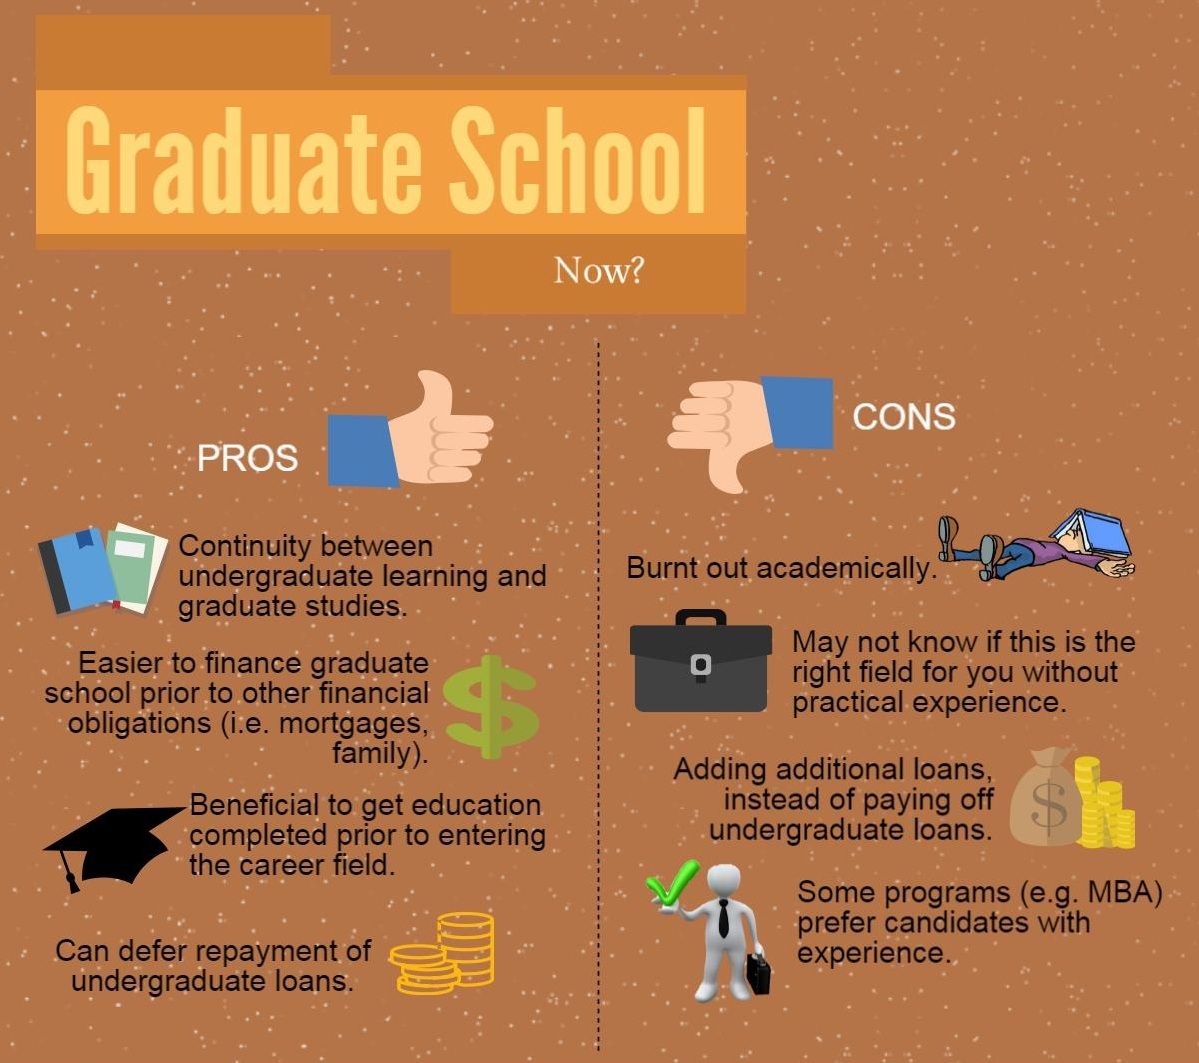 pros and cons of college education